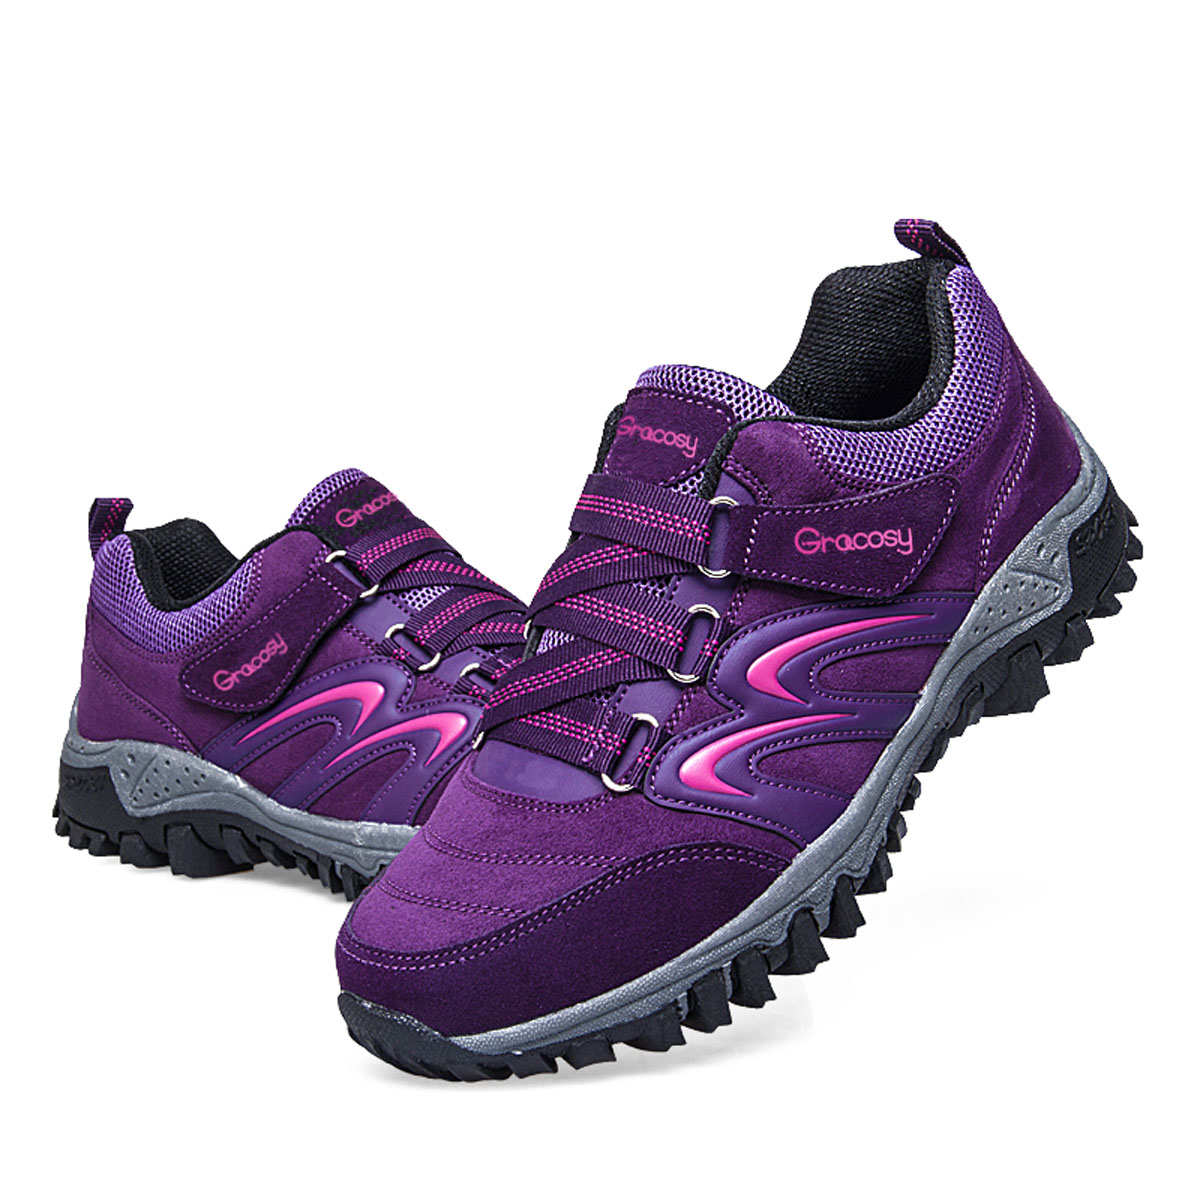 Gracosy--Breathable--Waterproof--Anti-slip-Rubber-Outsole-Outdoor-Camping-Hiking-Casual-Shoes-1262289